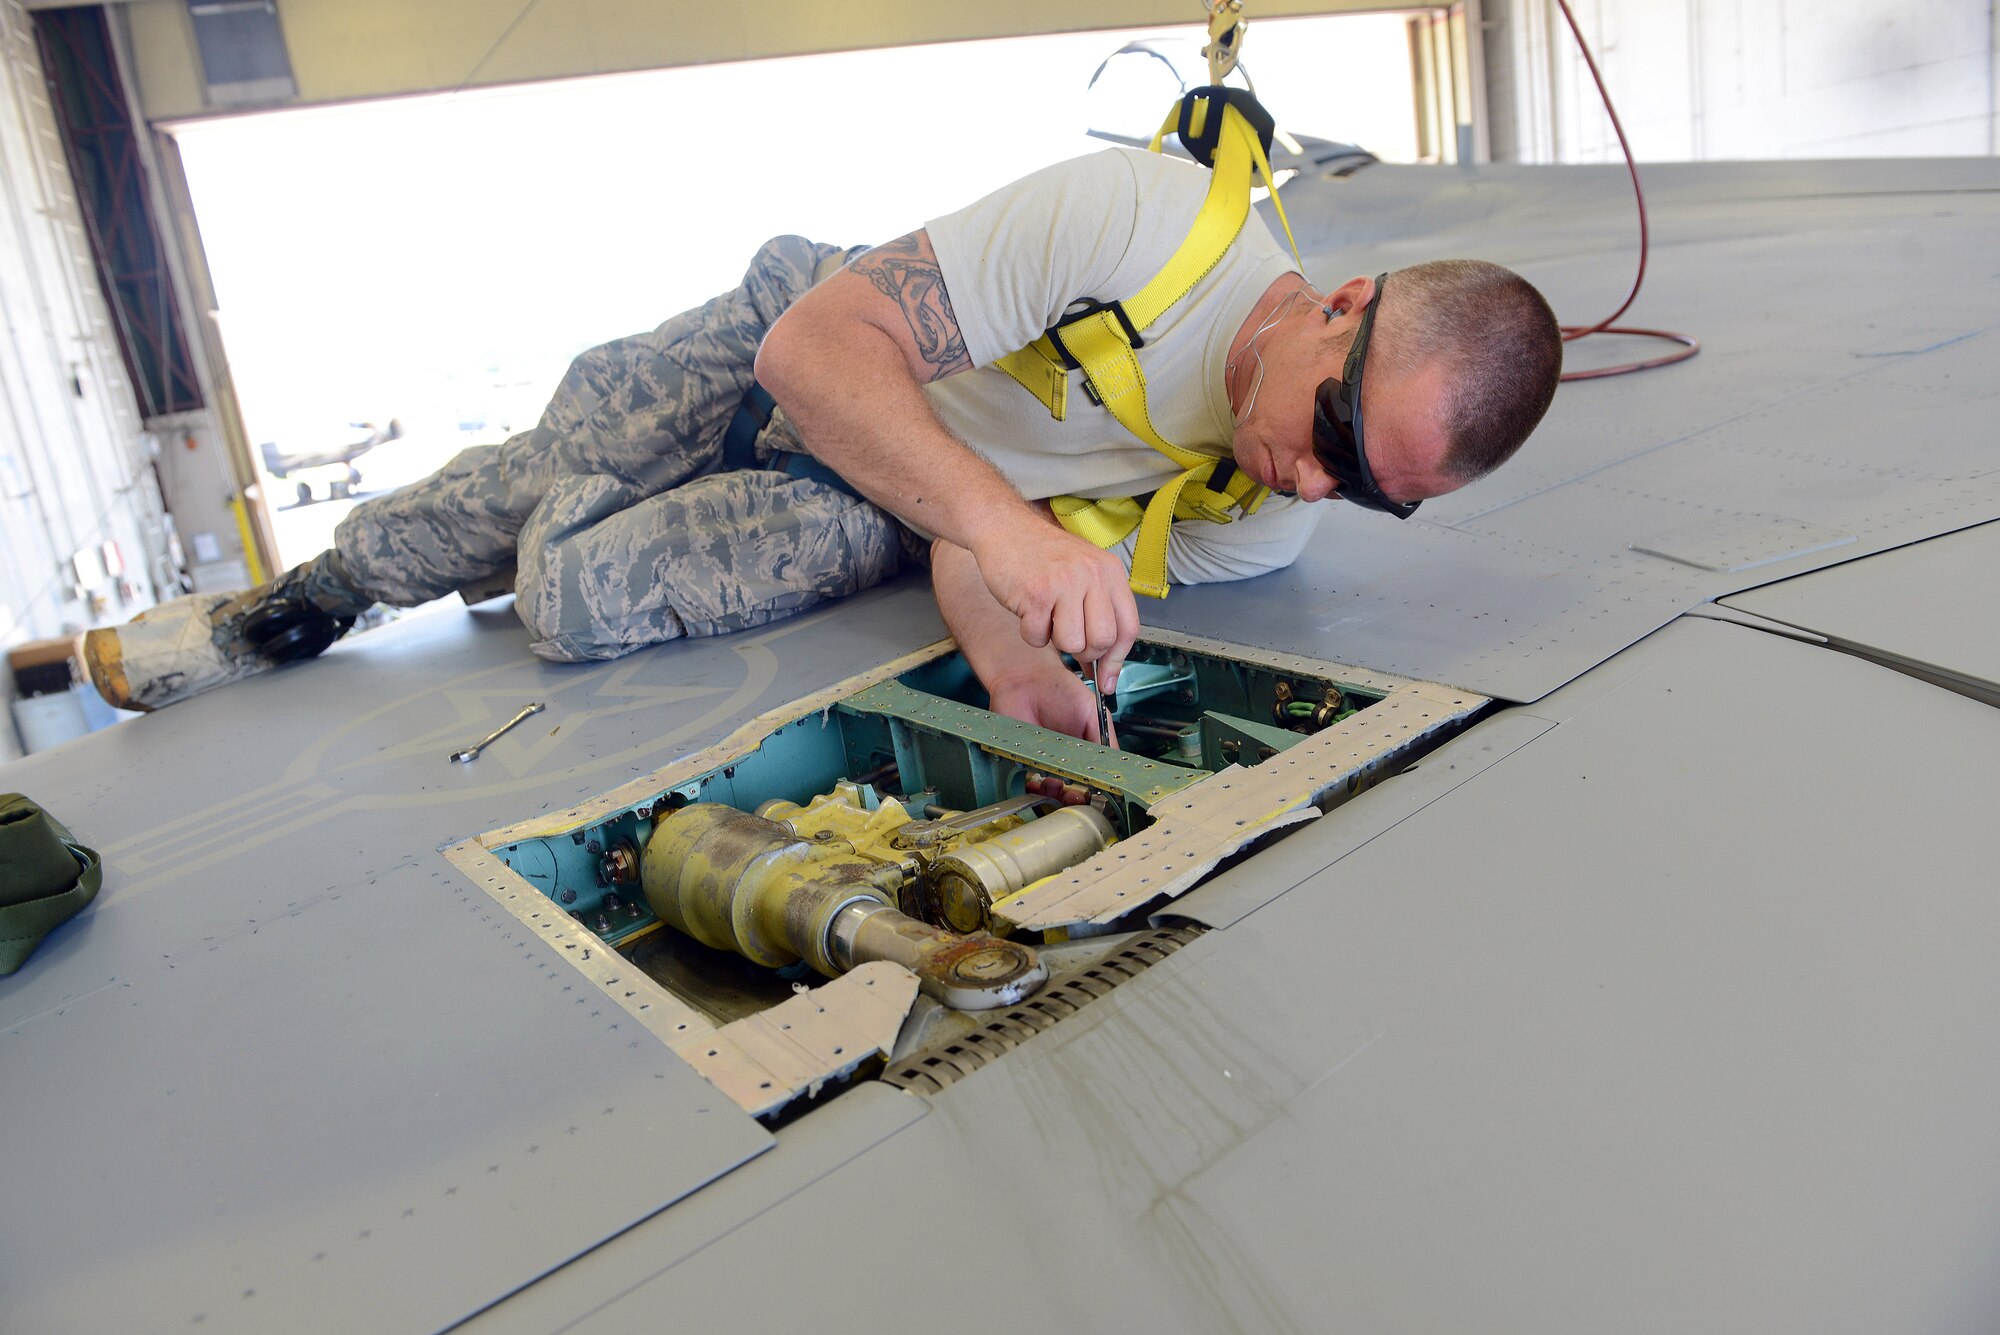 Tech. Sgt. Brandon Fitzpatrick, F-15 Functional Test, rigs flight controls on an F-15
Eagle in preparation of a functional test flight. Fall protection gear is a requirement for performing such repairs atop the aircraft. (U.S. Air Force photo by Tommie Horton)